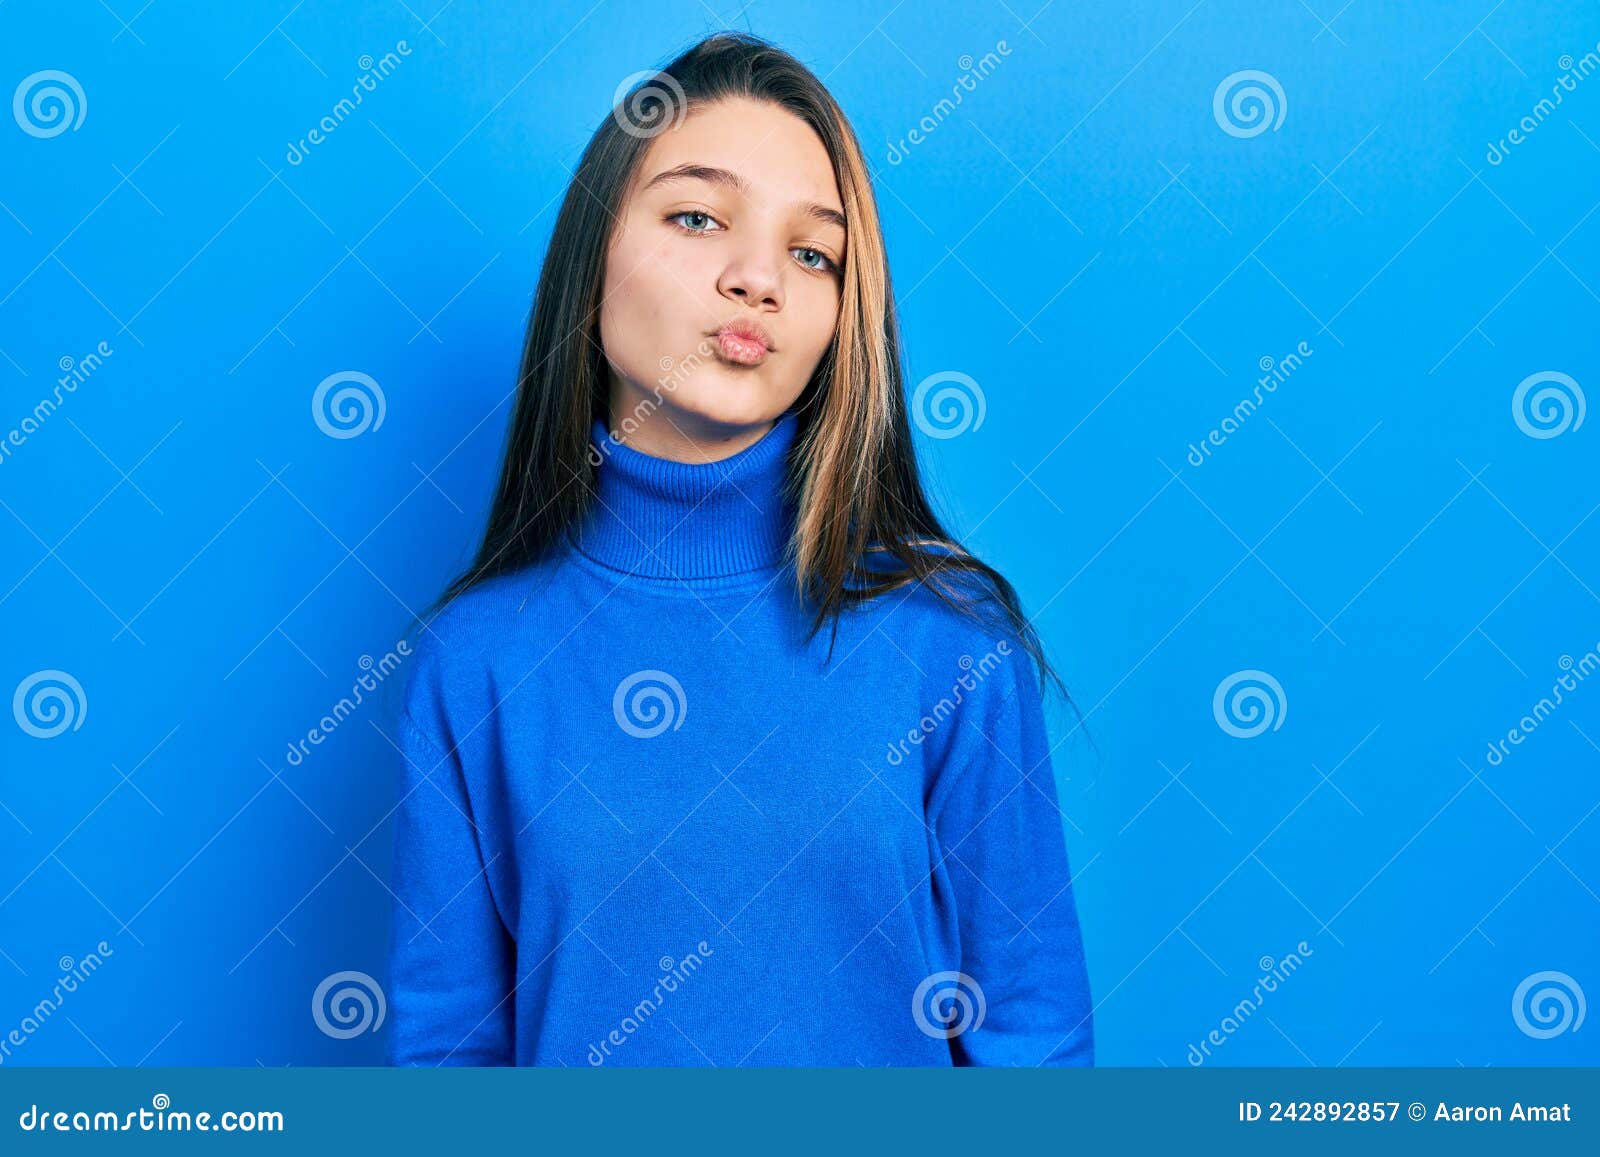 1,129 Sexy Kid Photos - Free & Royalty-Free Stock Photos from Dreamstime